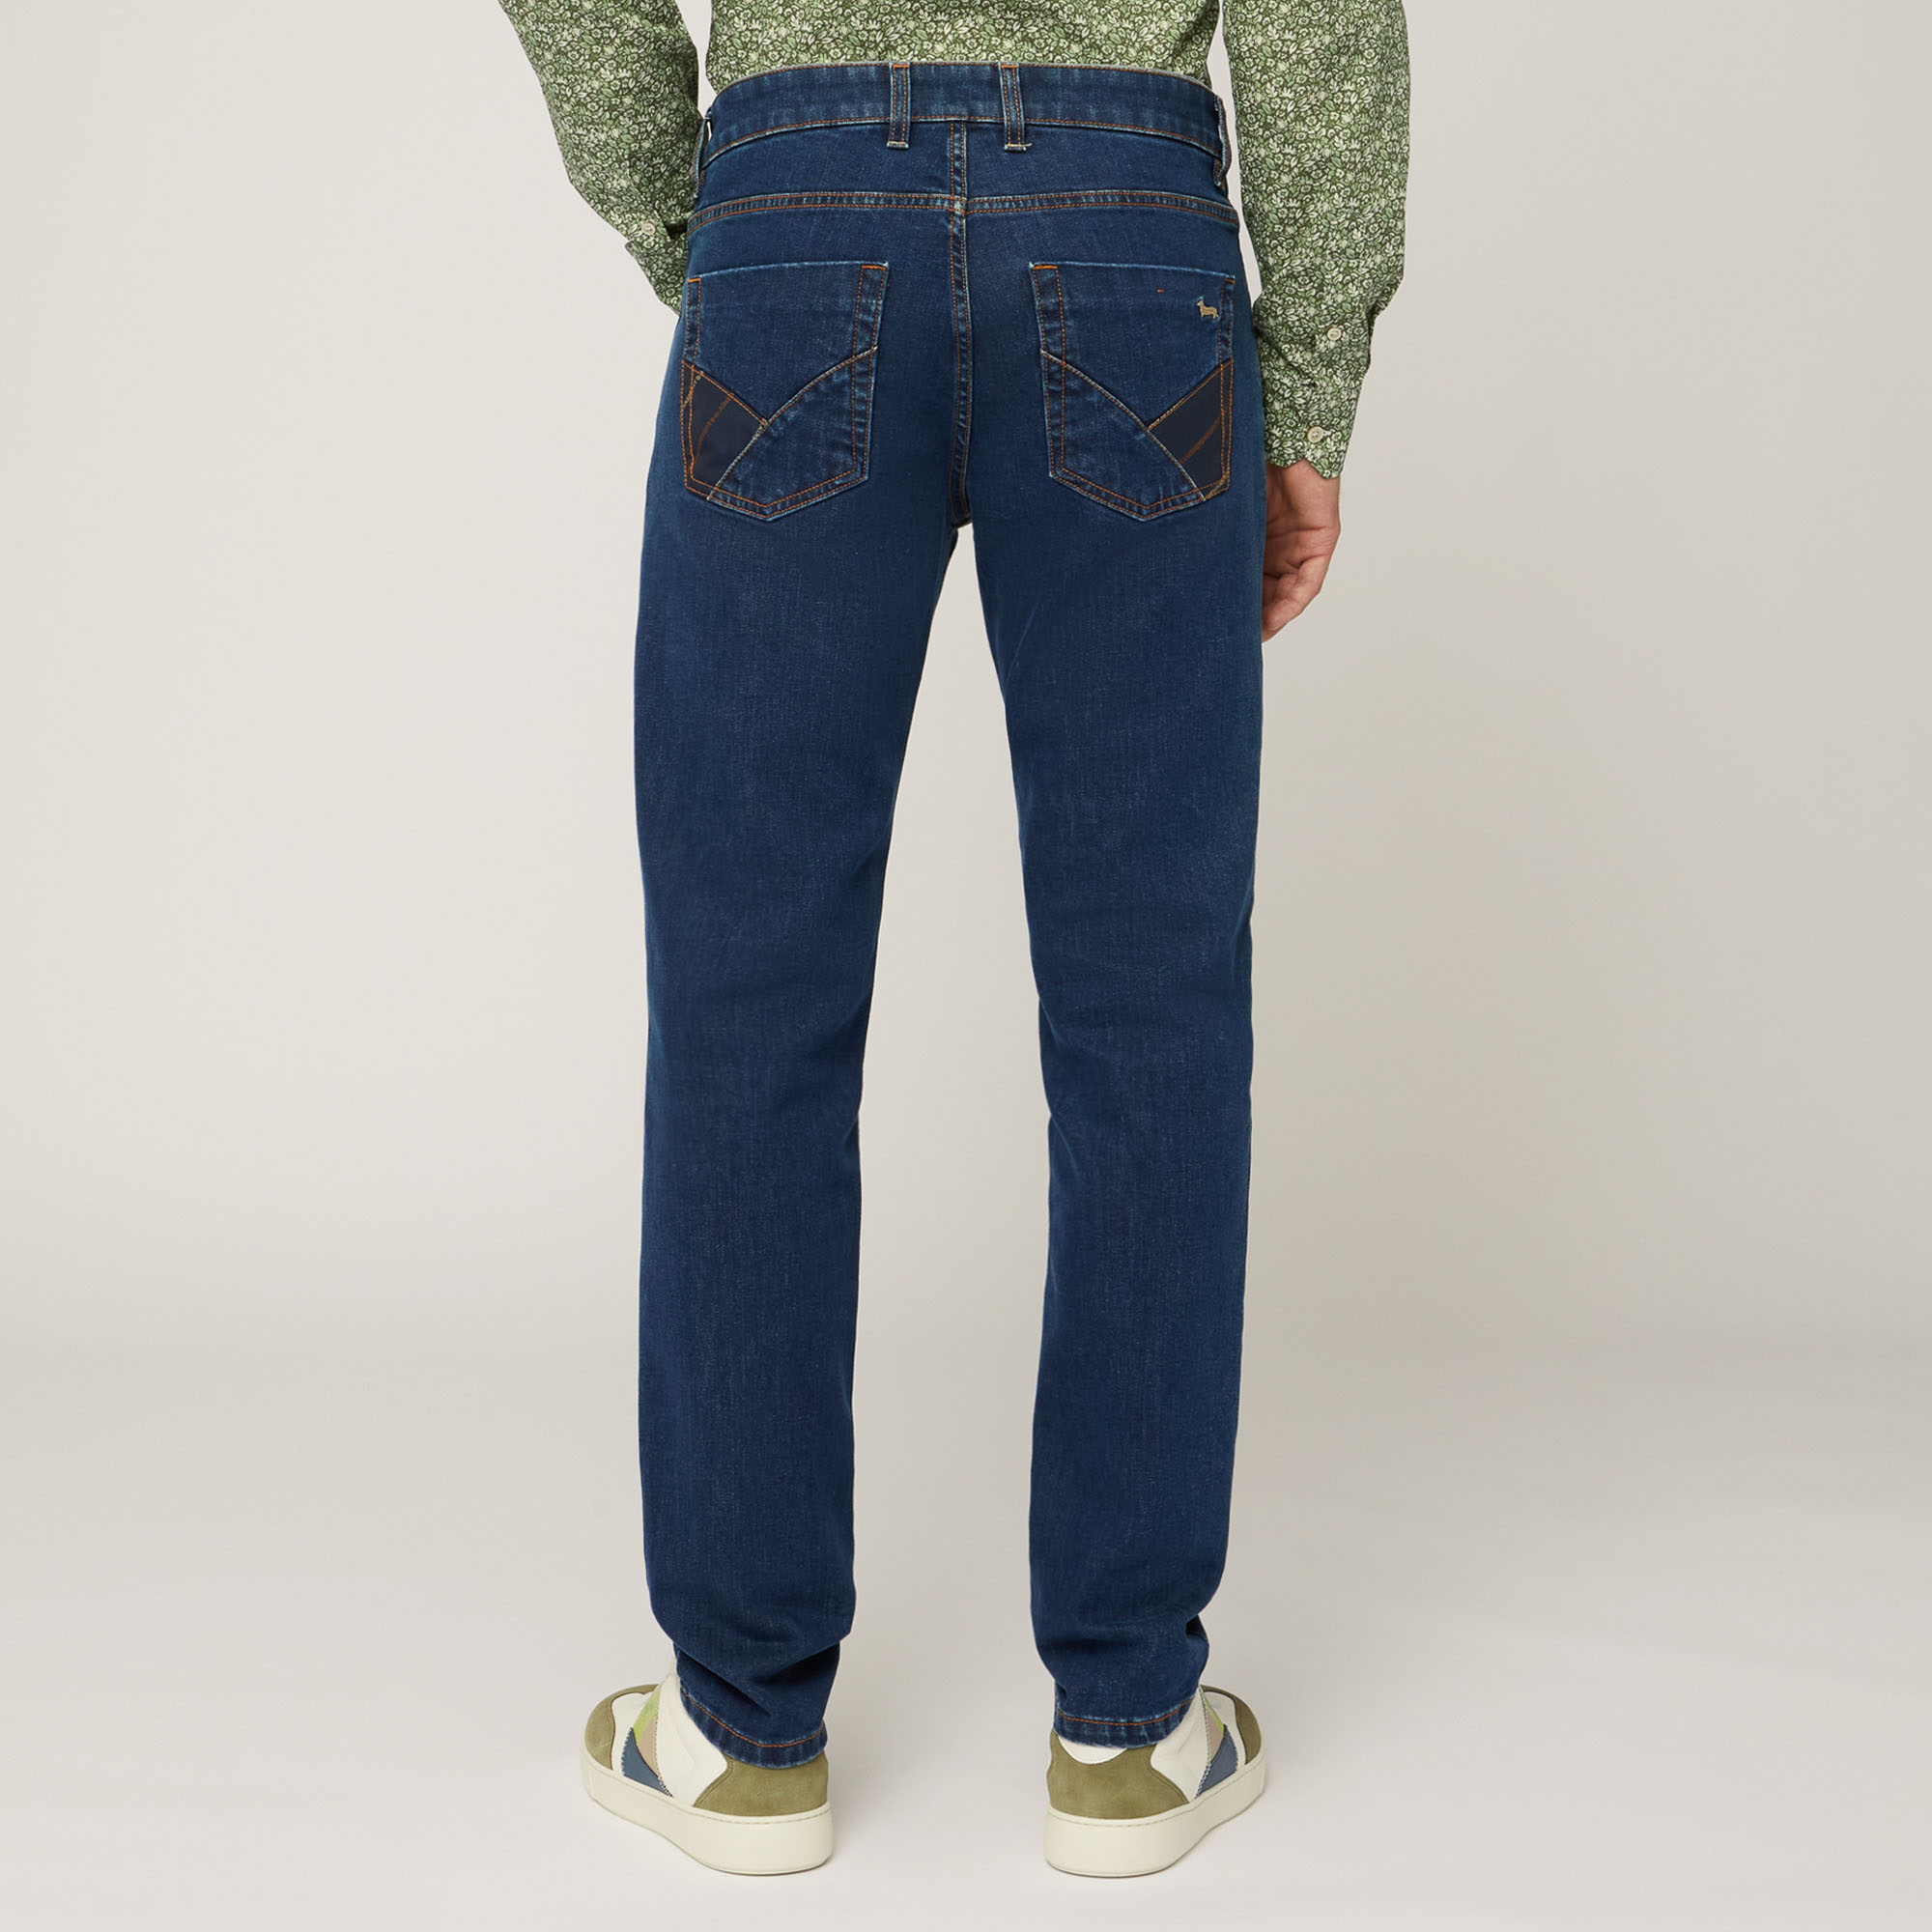 Denim Pants with Inserts